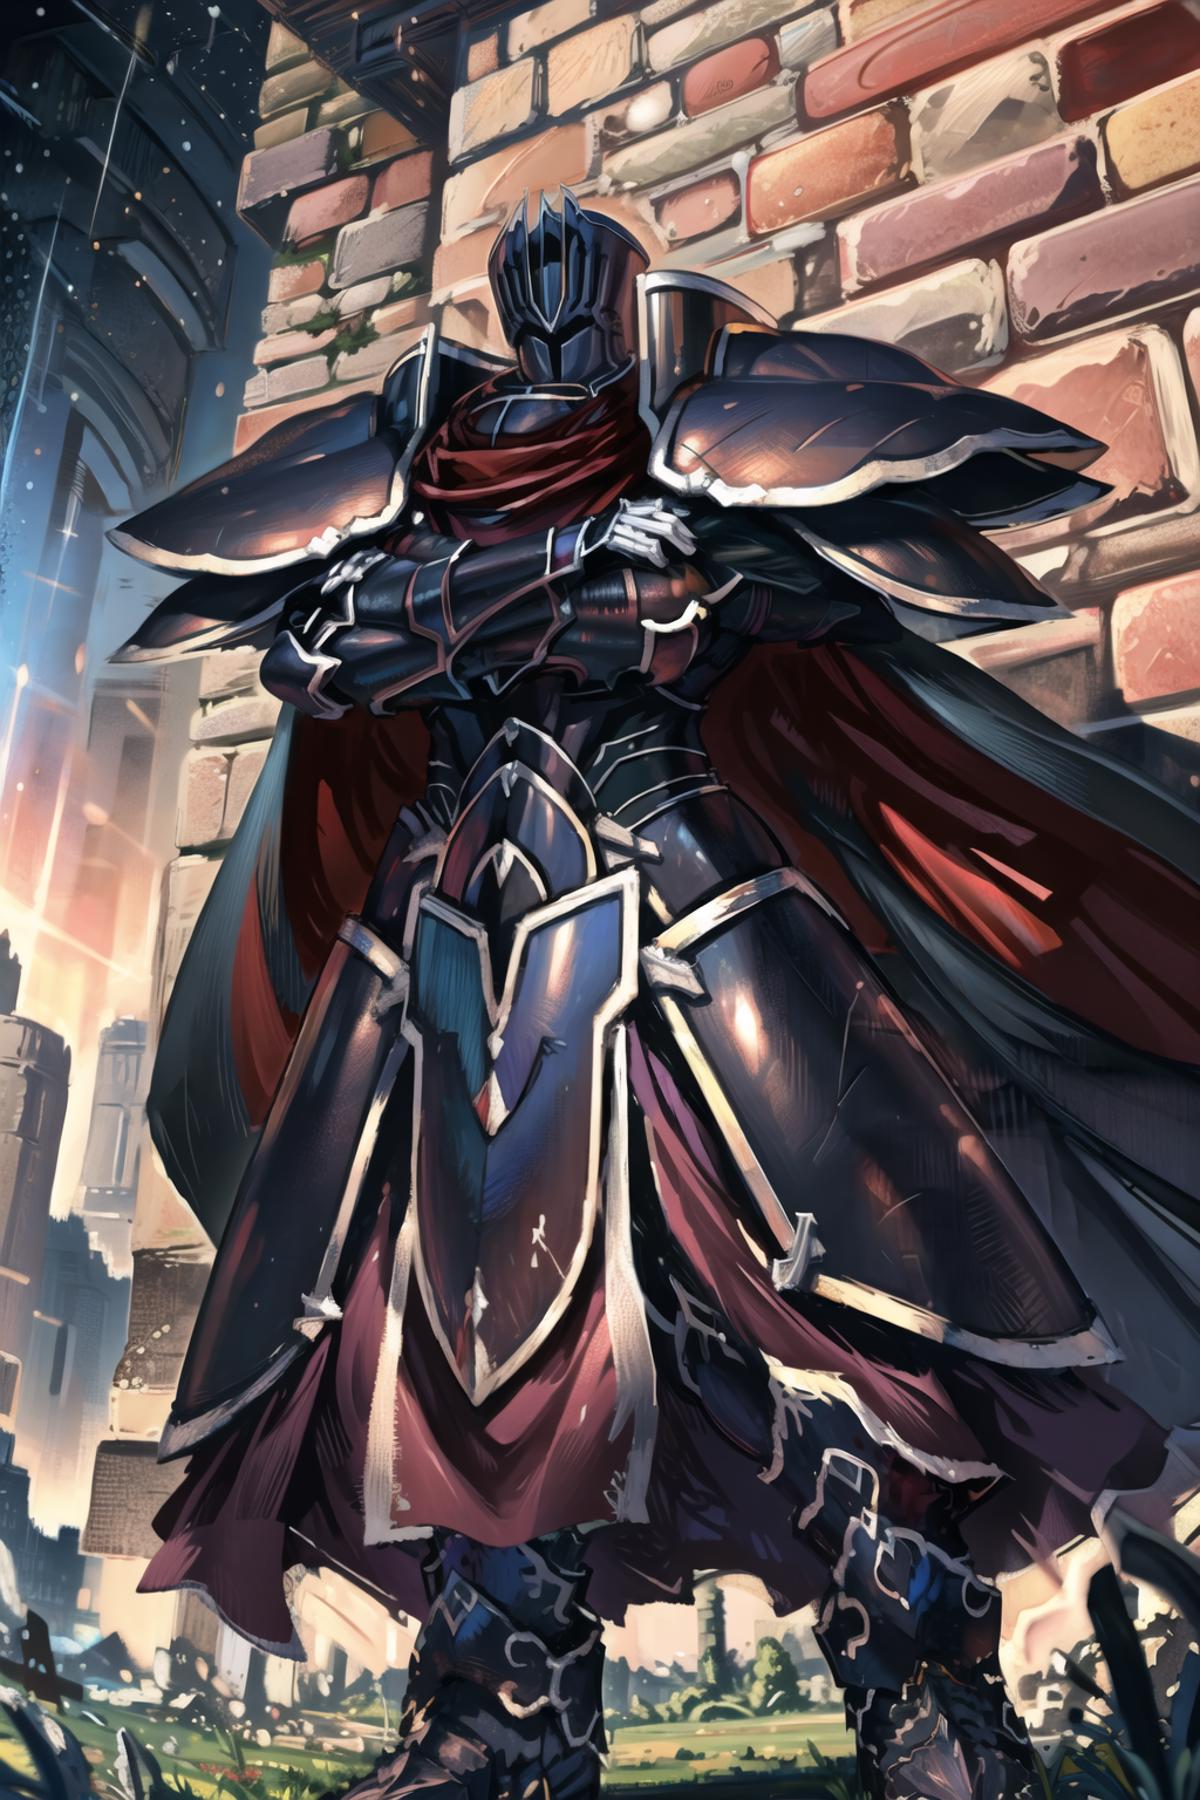 The Black Knight - Fire Emblem image by Fenchurch